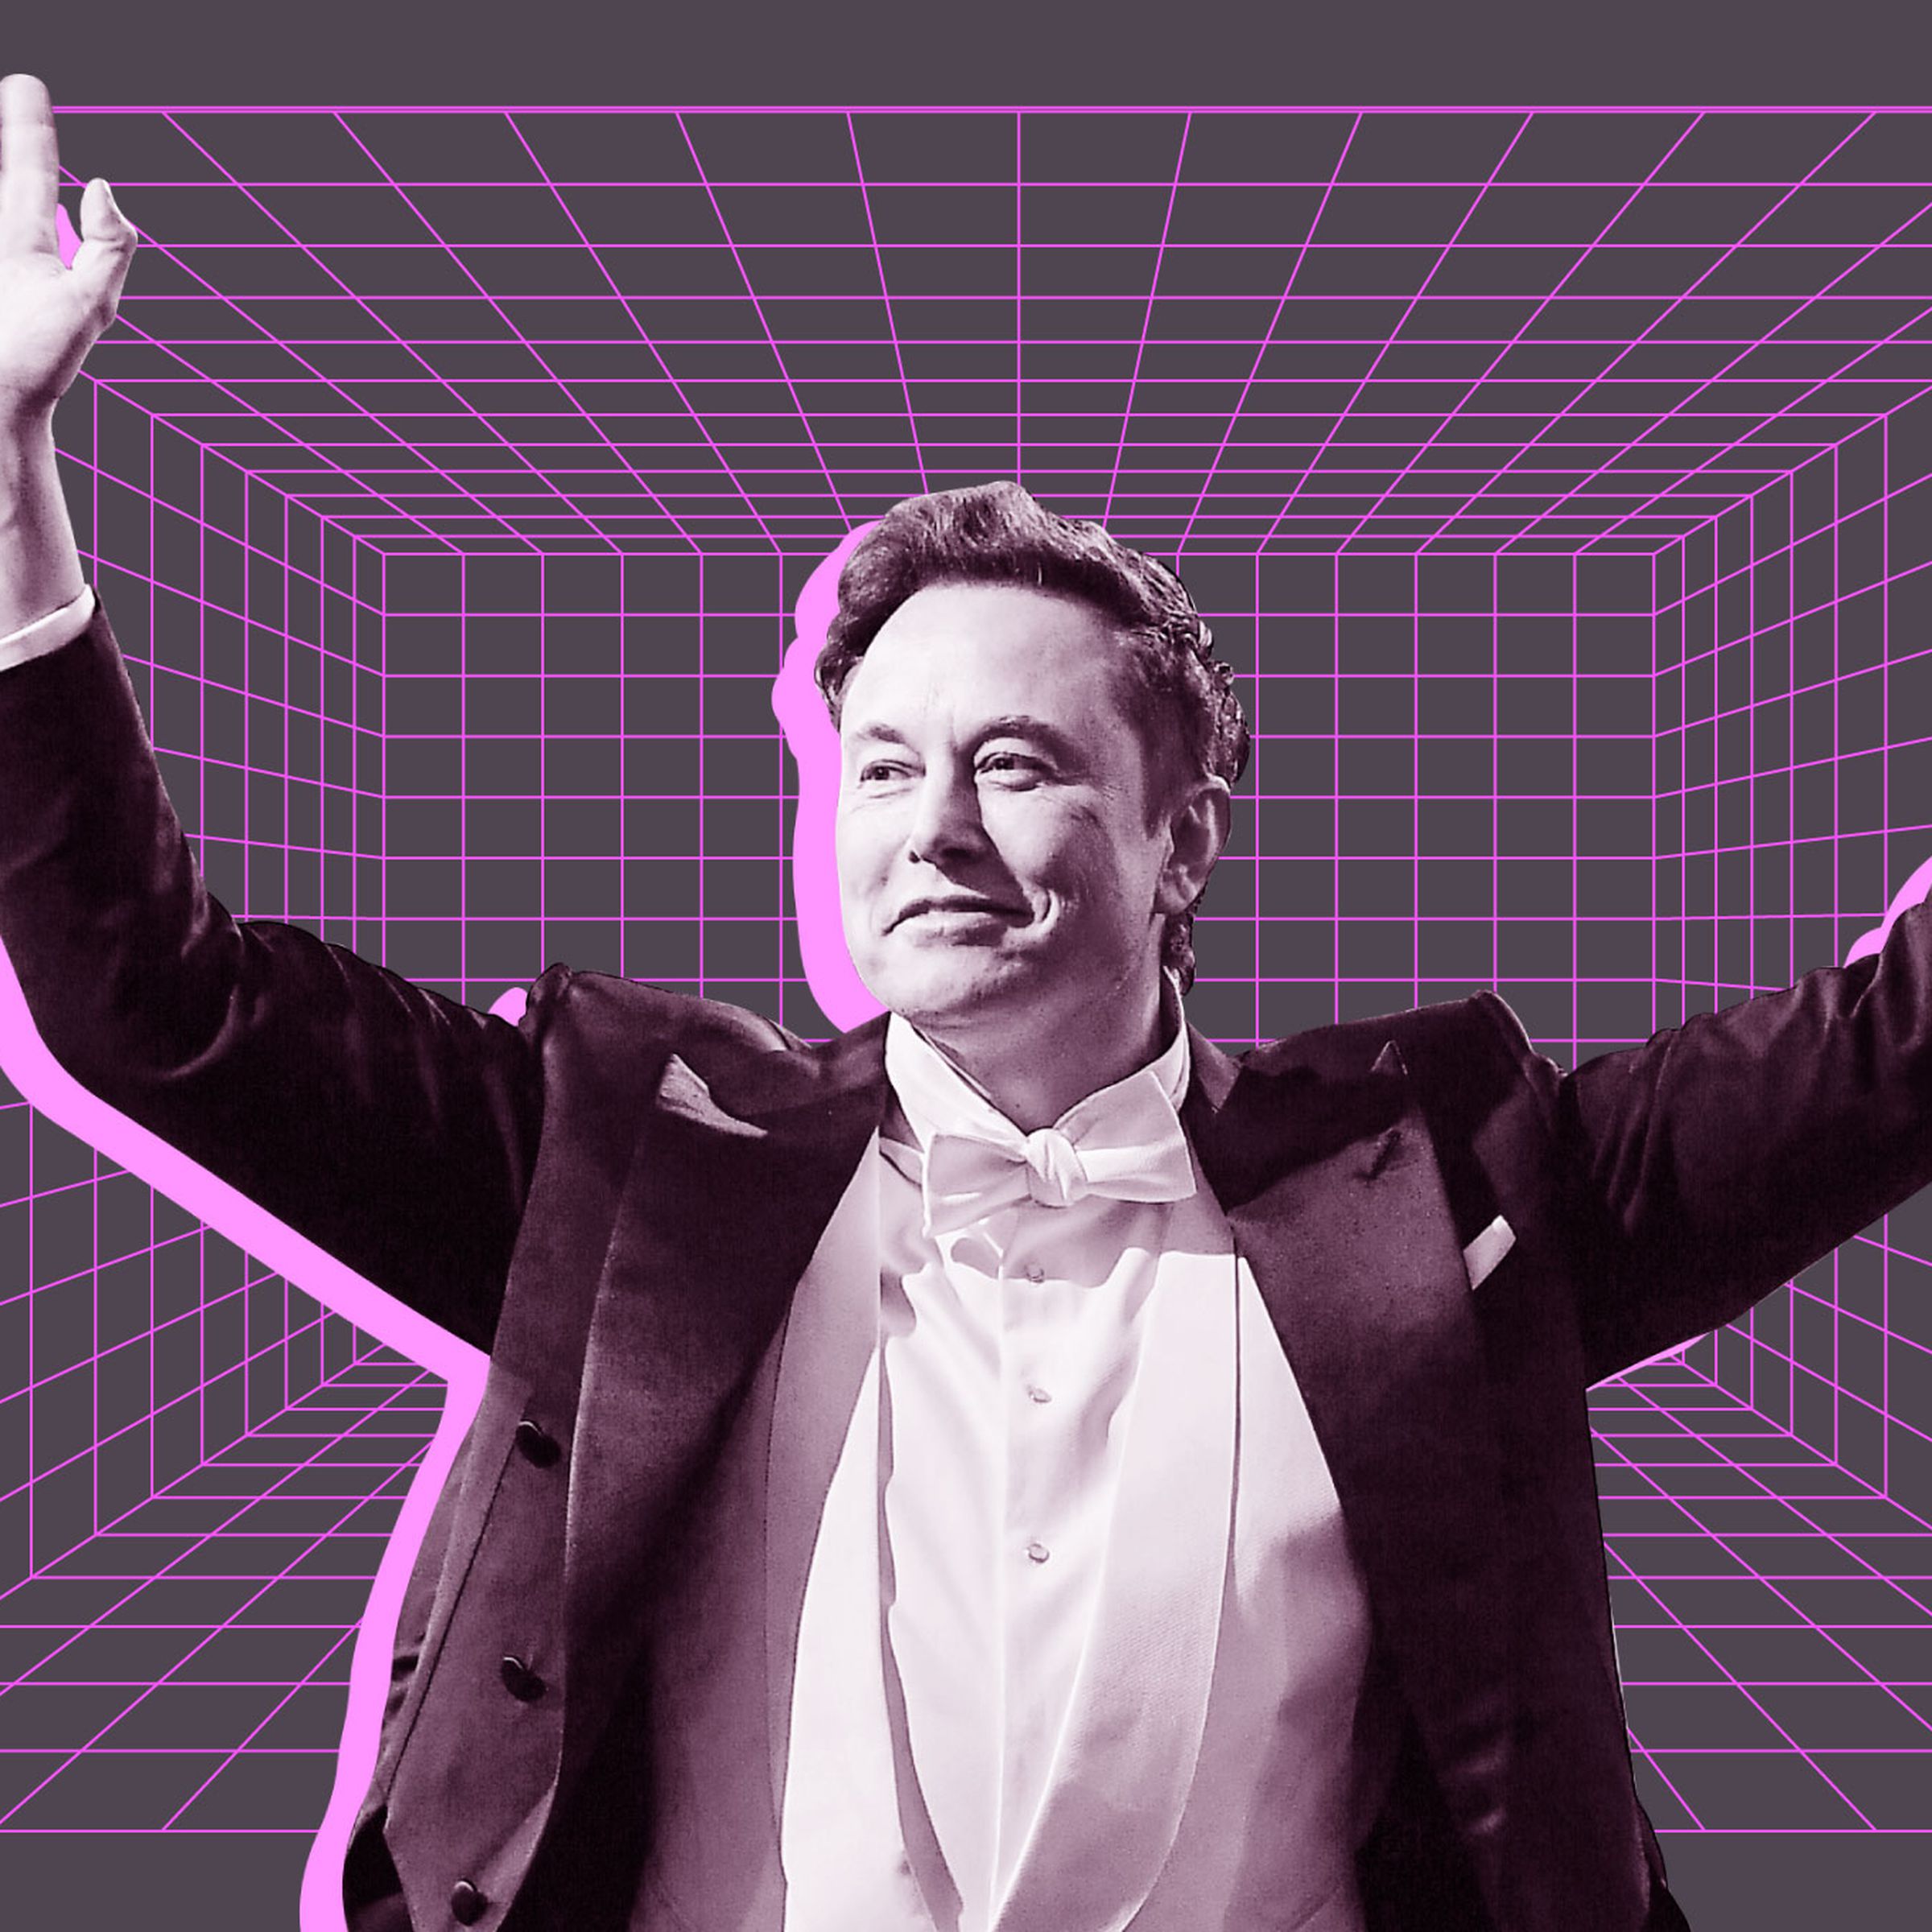 Elon Musk grins in a photo illustration, lifting his arms over his head triumphantly